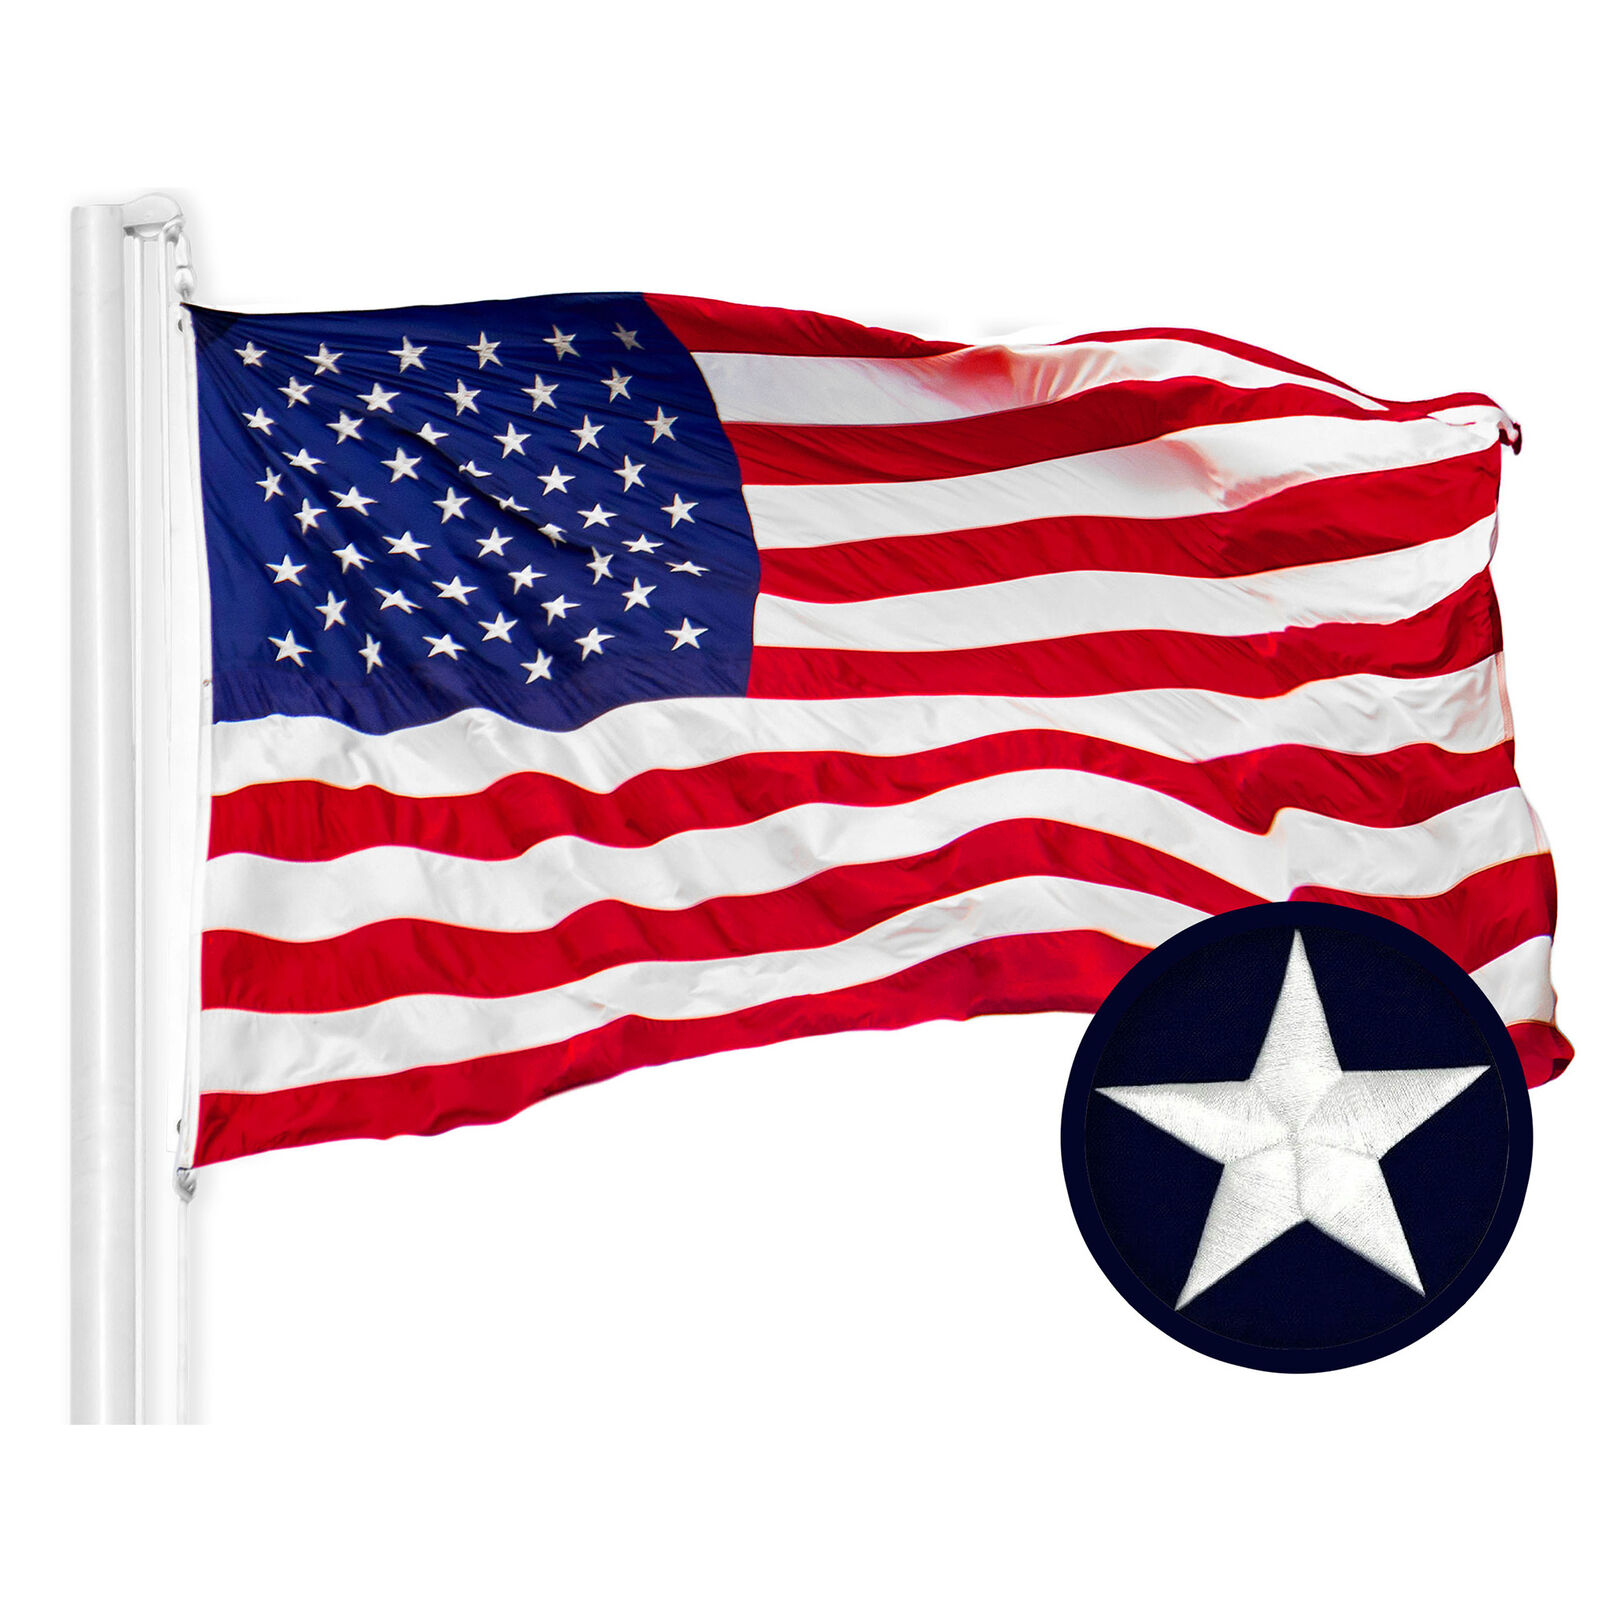 G128 – American Flag US USA | 6x10 ft | Commercial-Grade NYLON Embroidered Stars